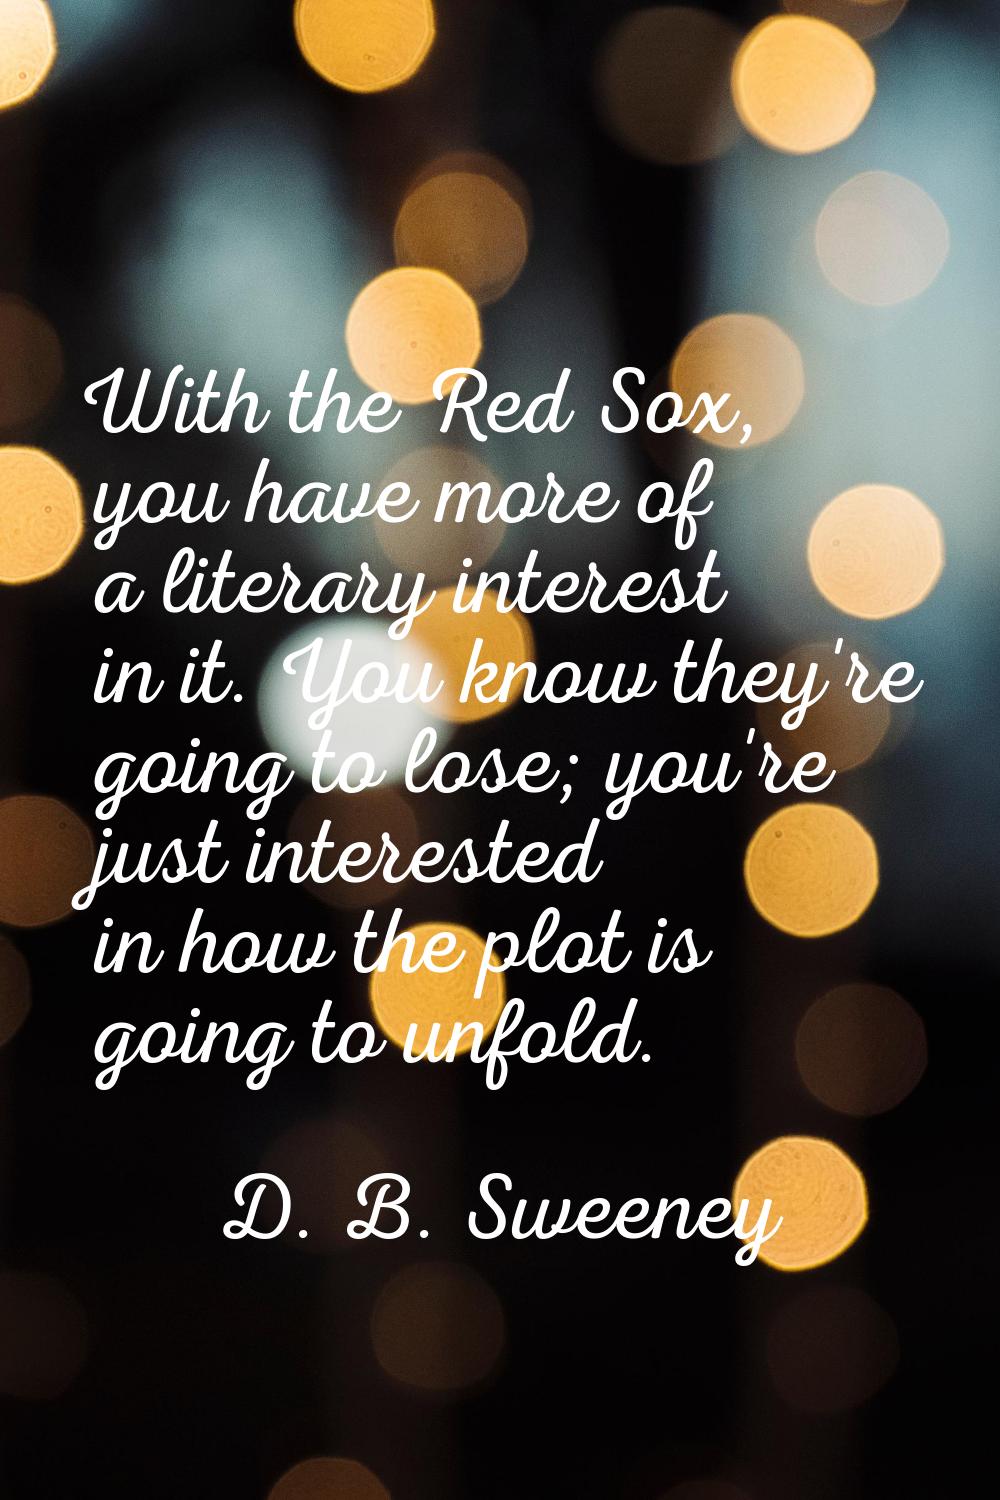 With the Red Sox, you have more of a literary interest in it. You know they're going to lose; you'r